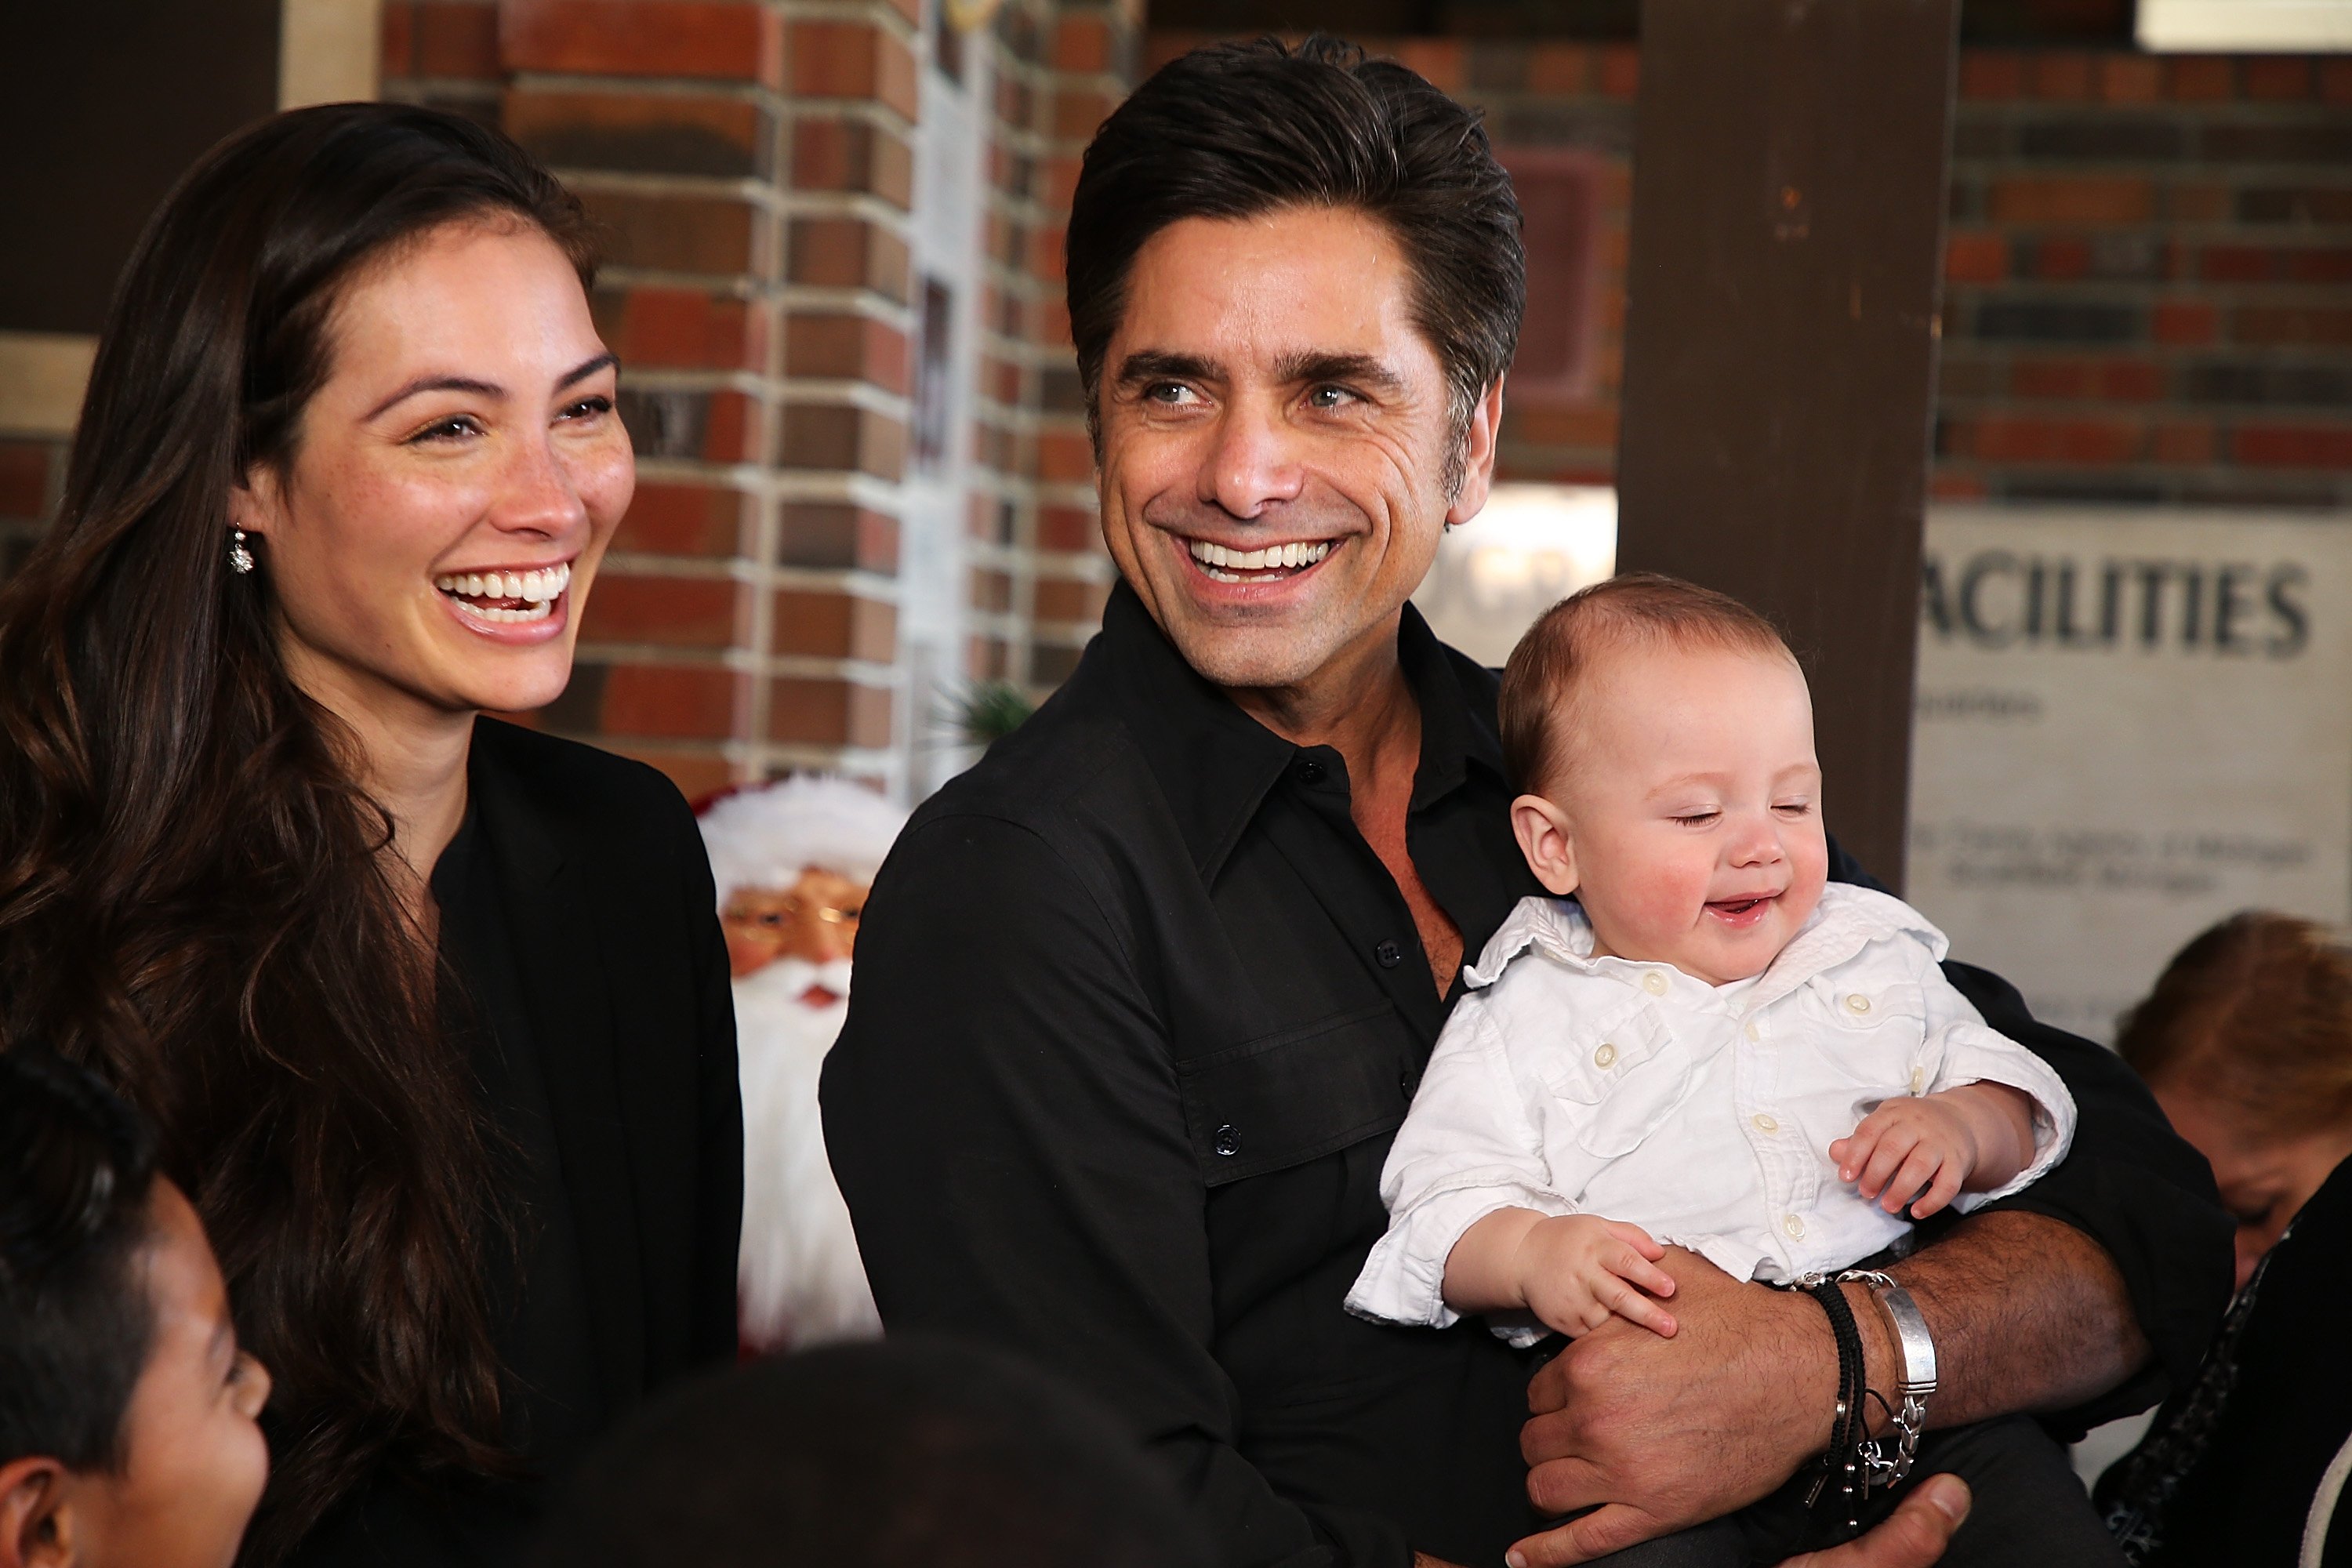 John Stamos with his wife Caitlin McHugh and their son, Billy Stamos attend a special event on November 27, 2018 in Beaumont, California | Photo: Getty Images